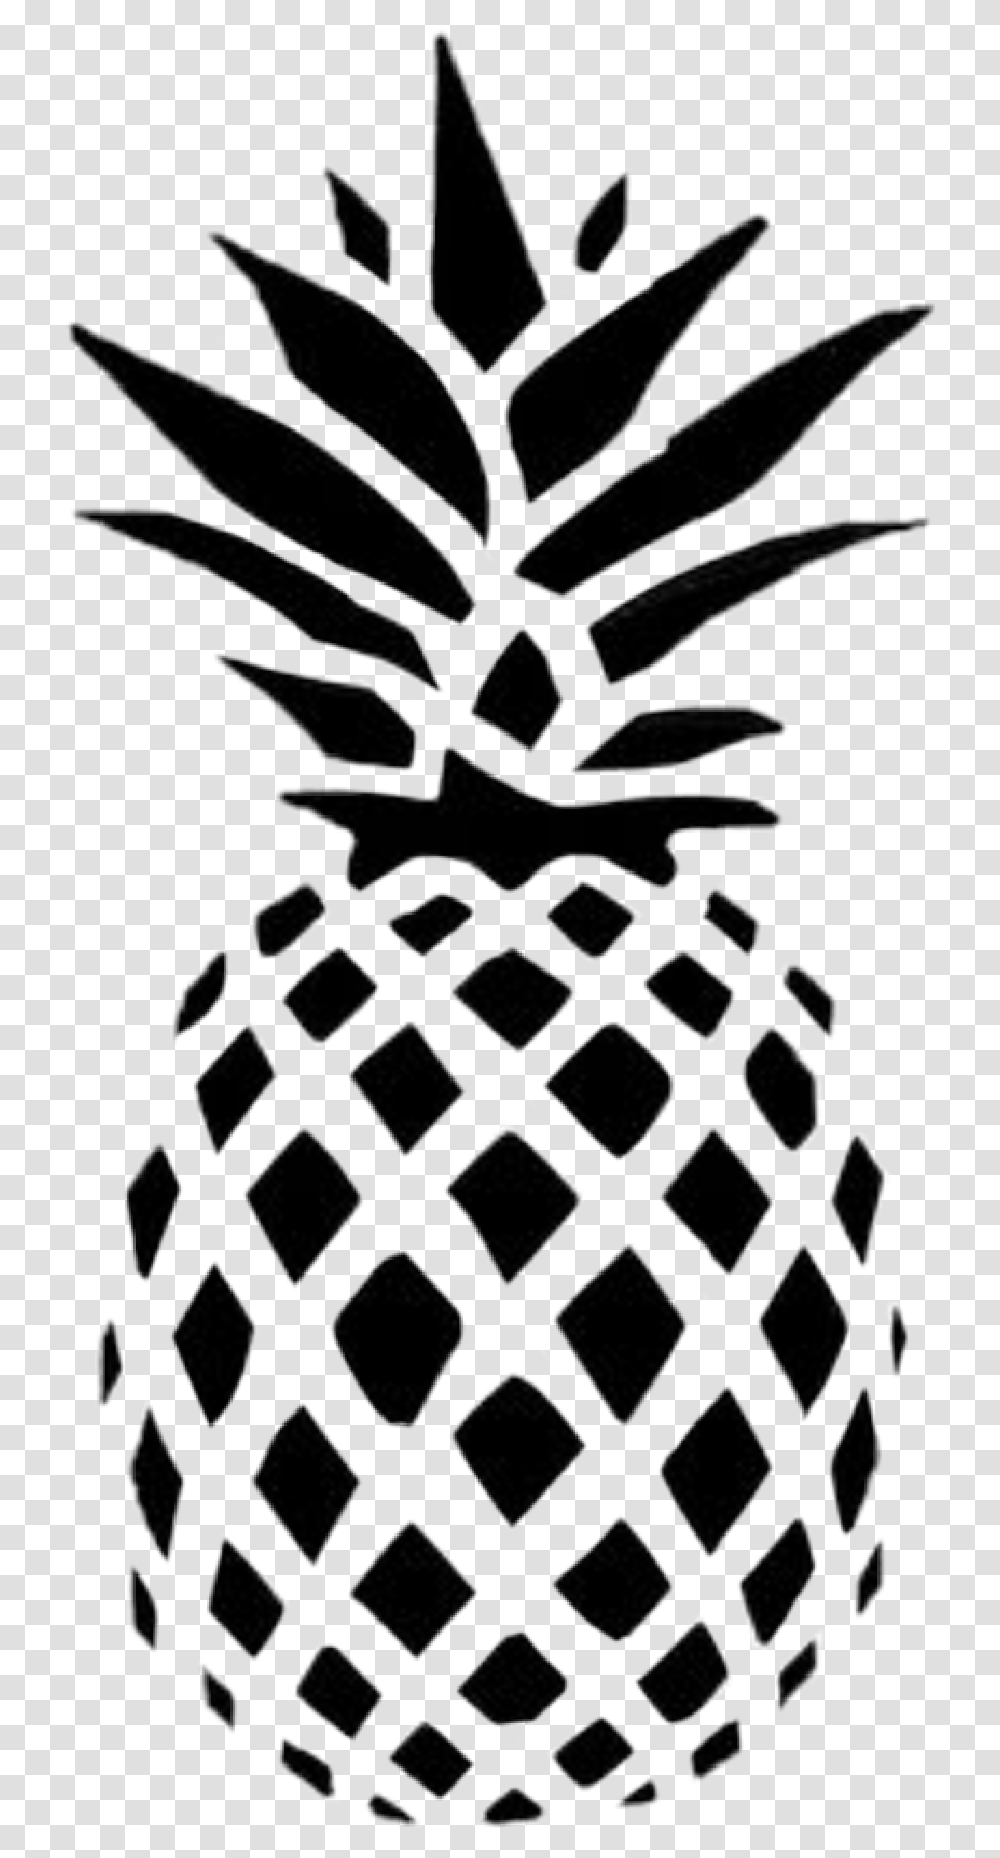 Tumblr Pineapple Pineapple Decal, Stencil, Fruit, Plant, Food Transparent Png